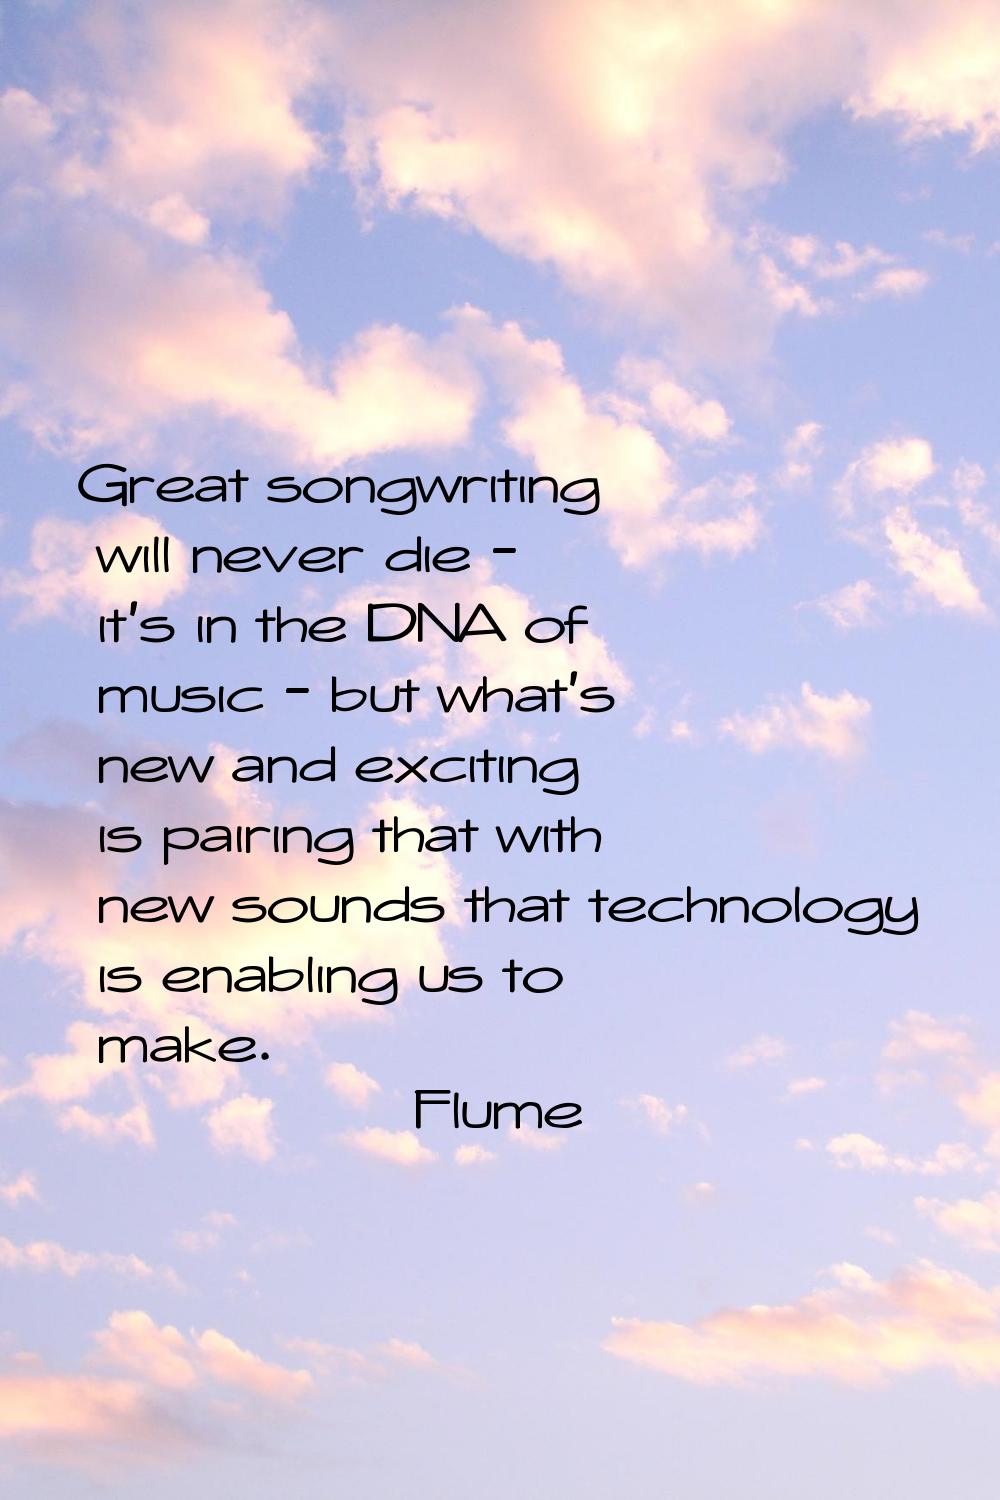 Great songwriting will never die - it's in the DNA of music - but what's new and exciting is pairin